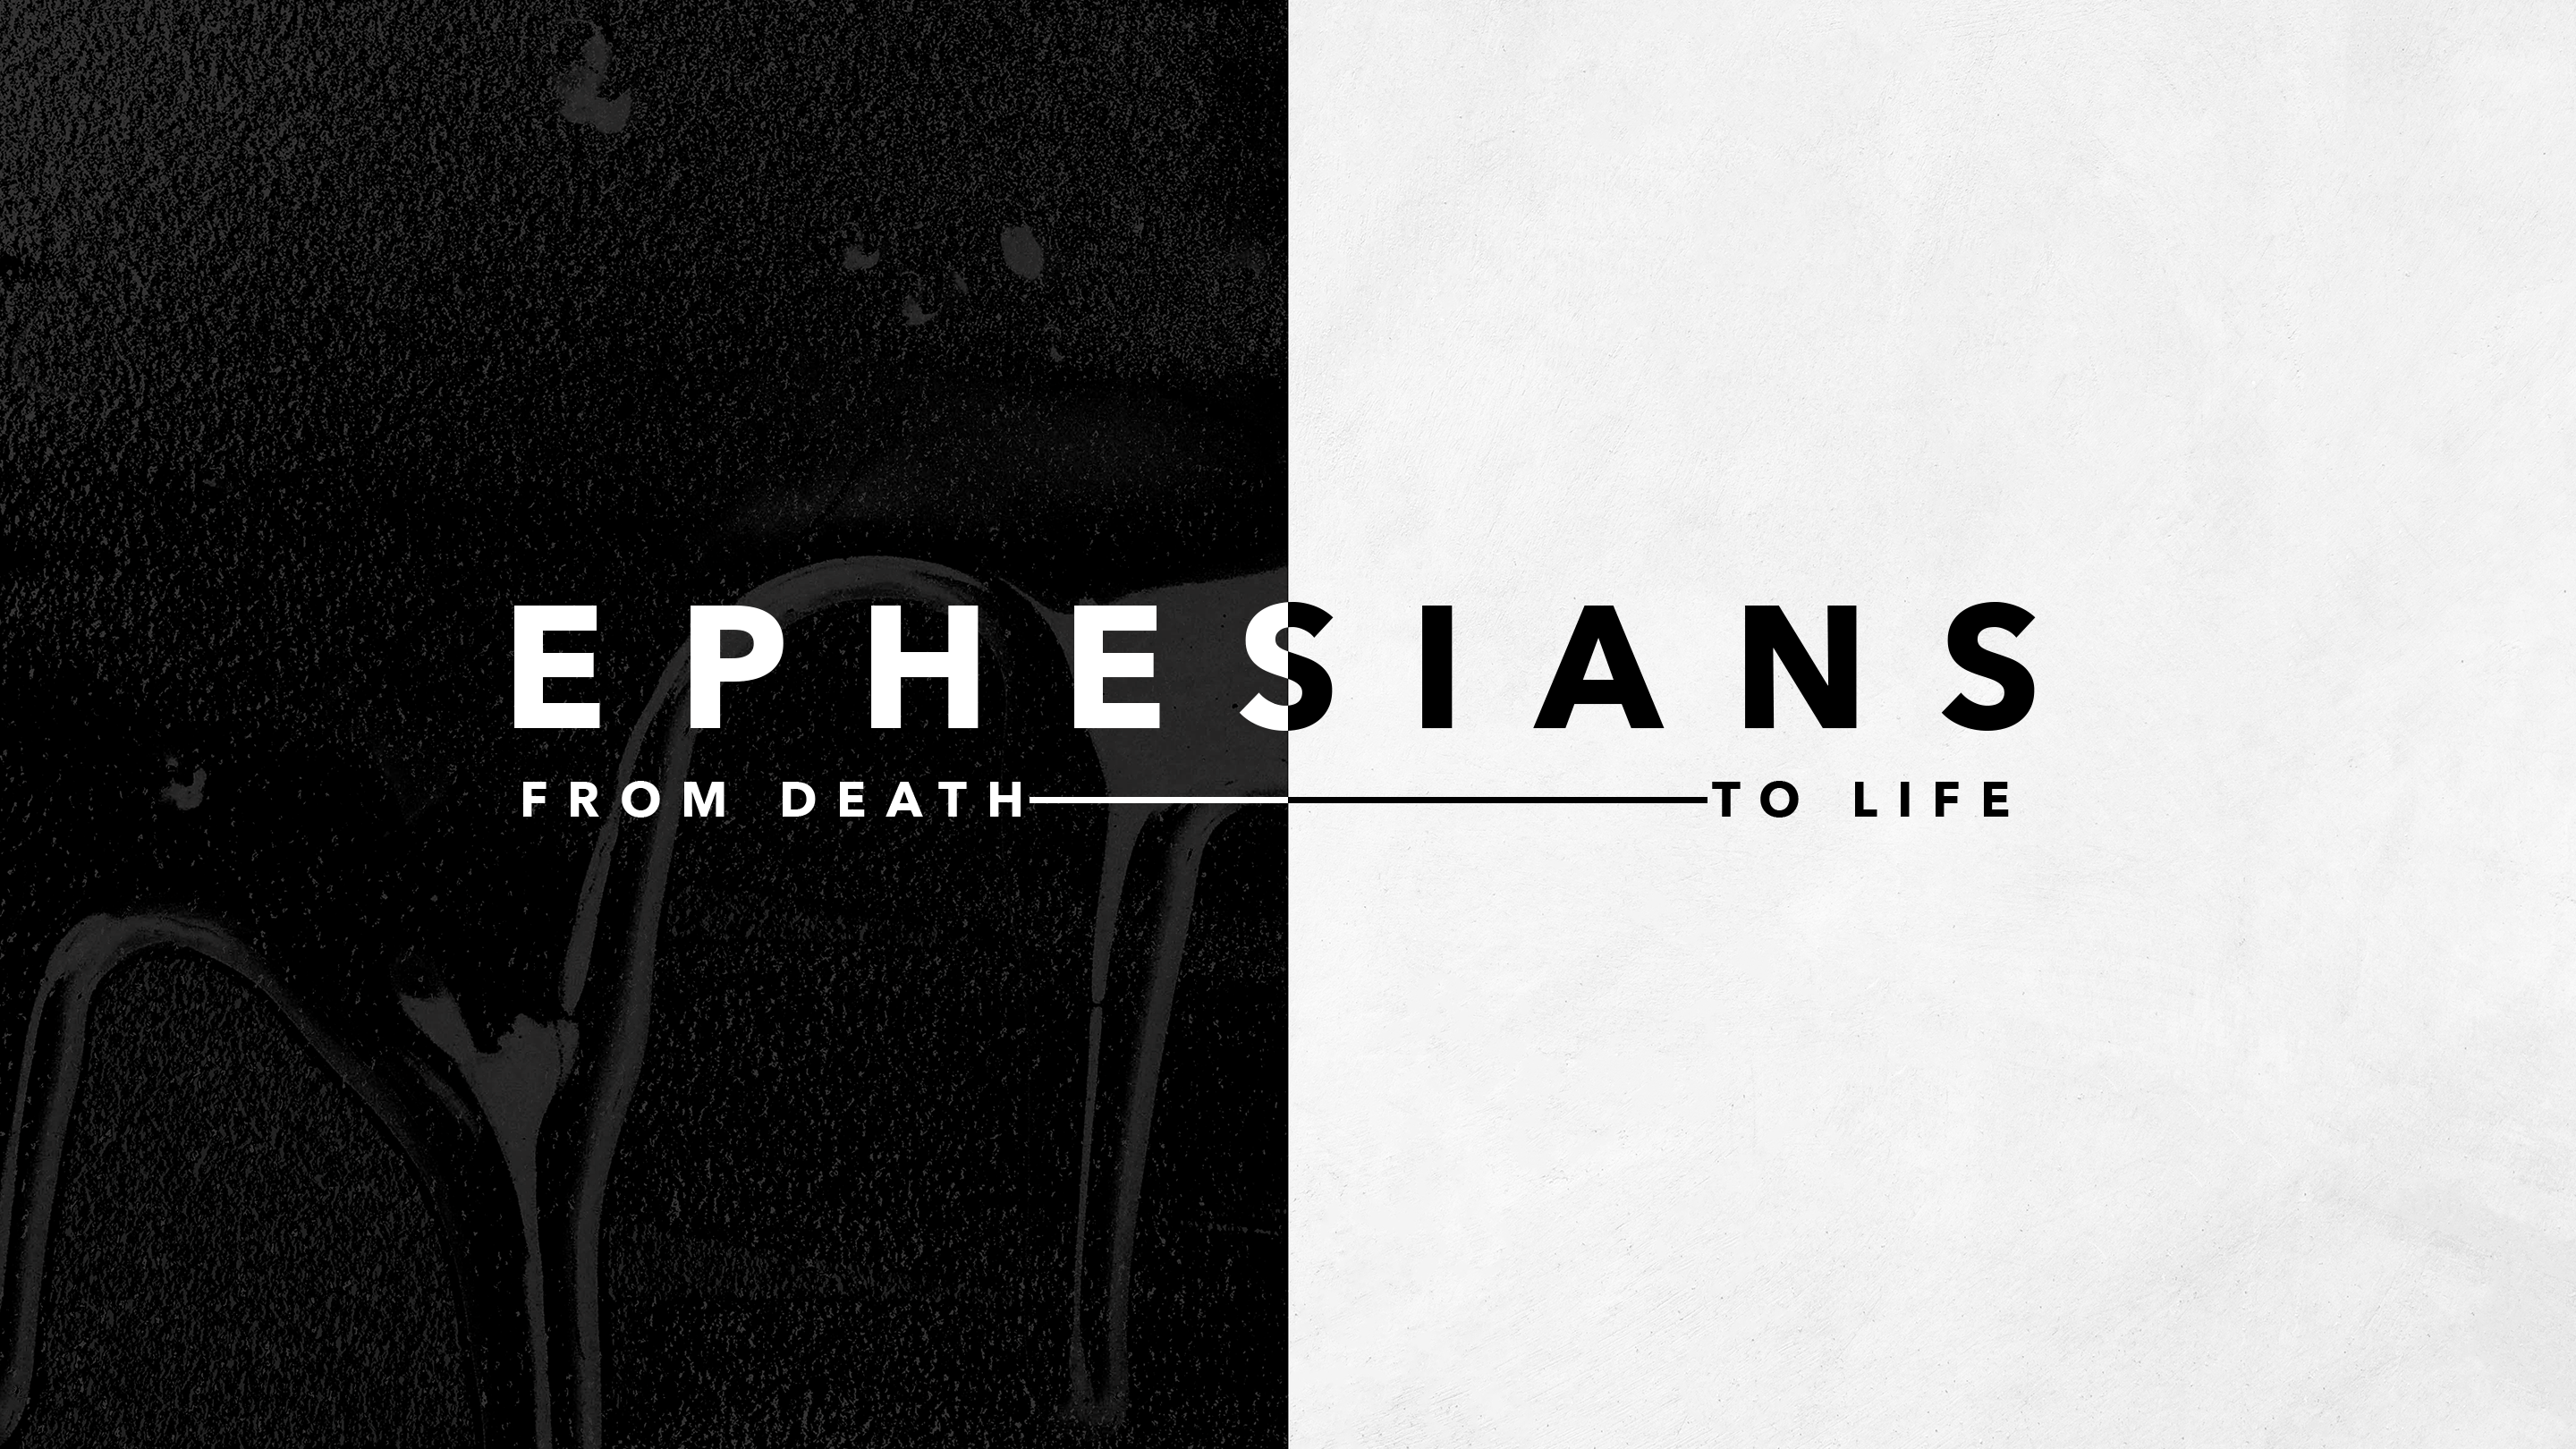 From Death to Life: The Wonder of Grace (Ephesians 2:1-10)